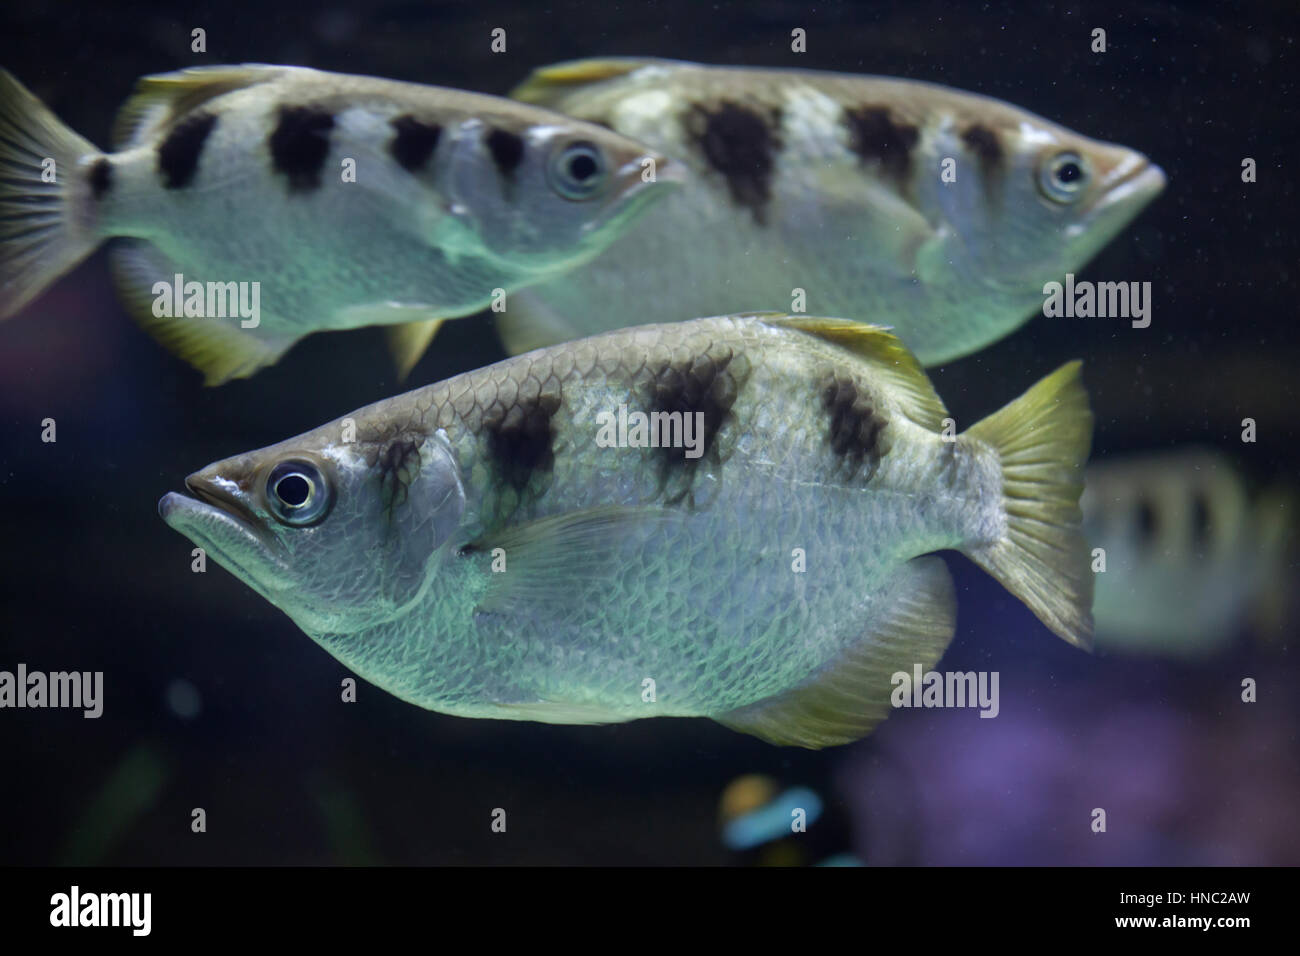 Banded archerfish (Toxotes jaculatrix), also known as the spinner fish. Stock Photo